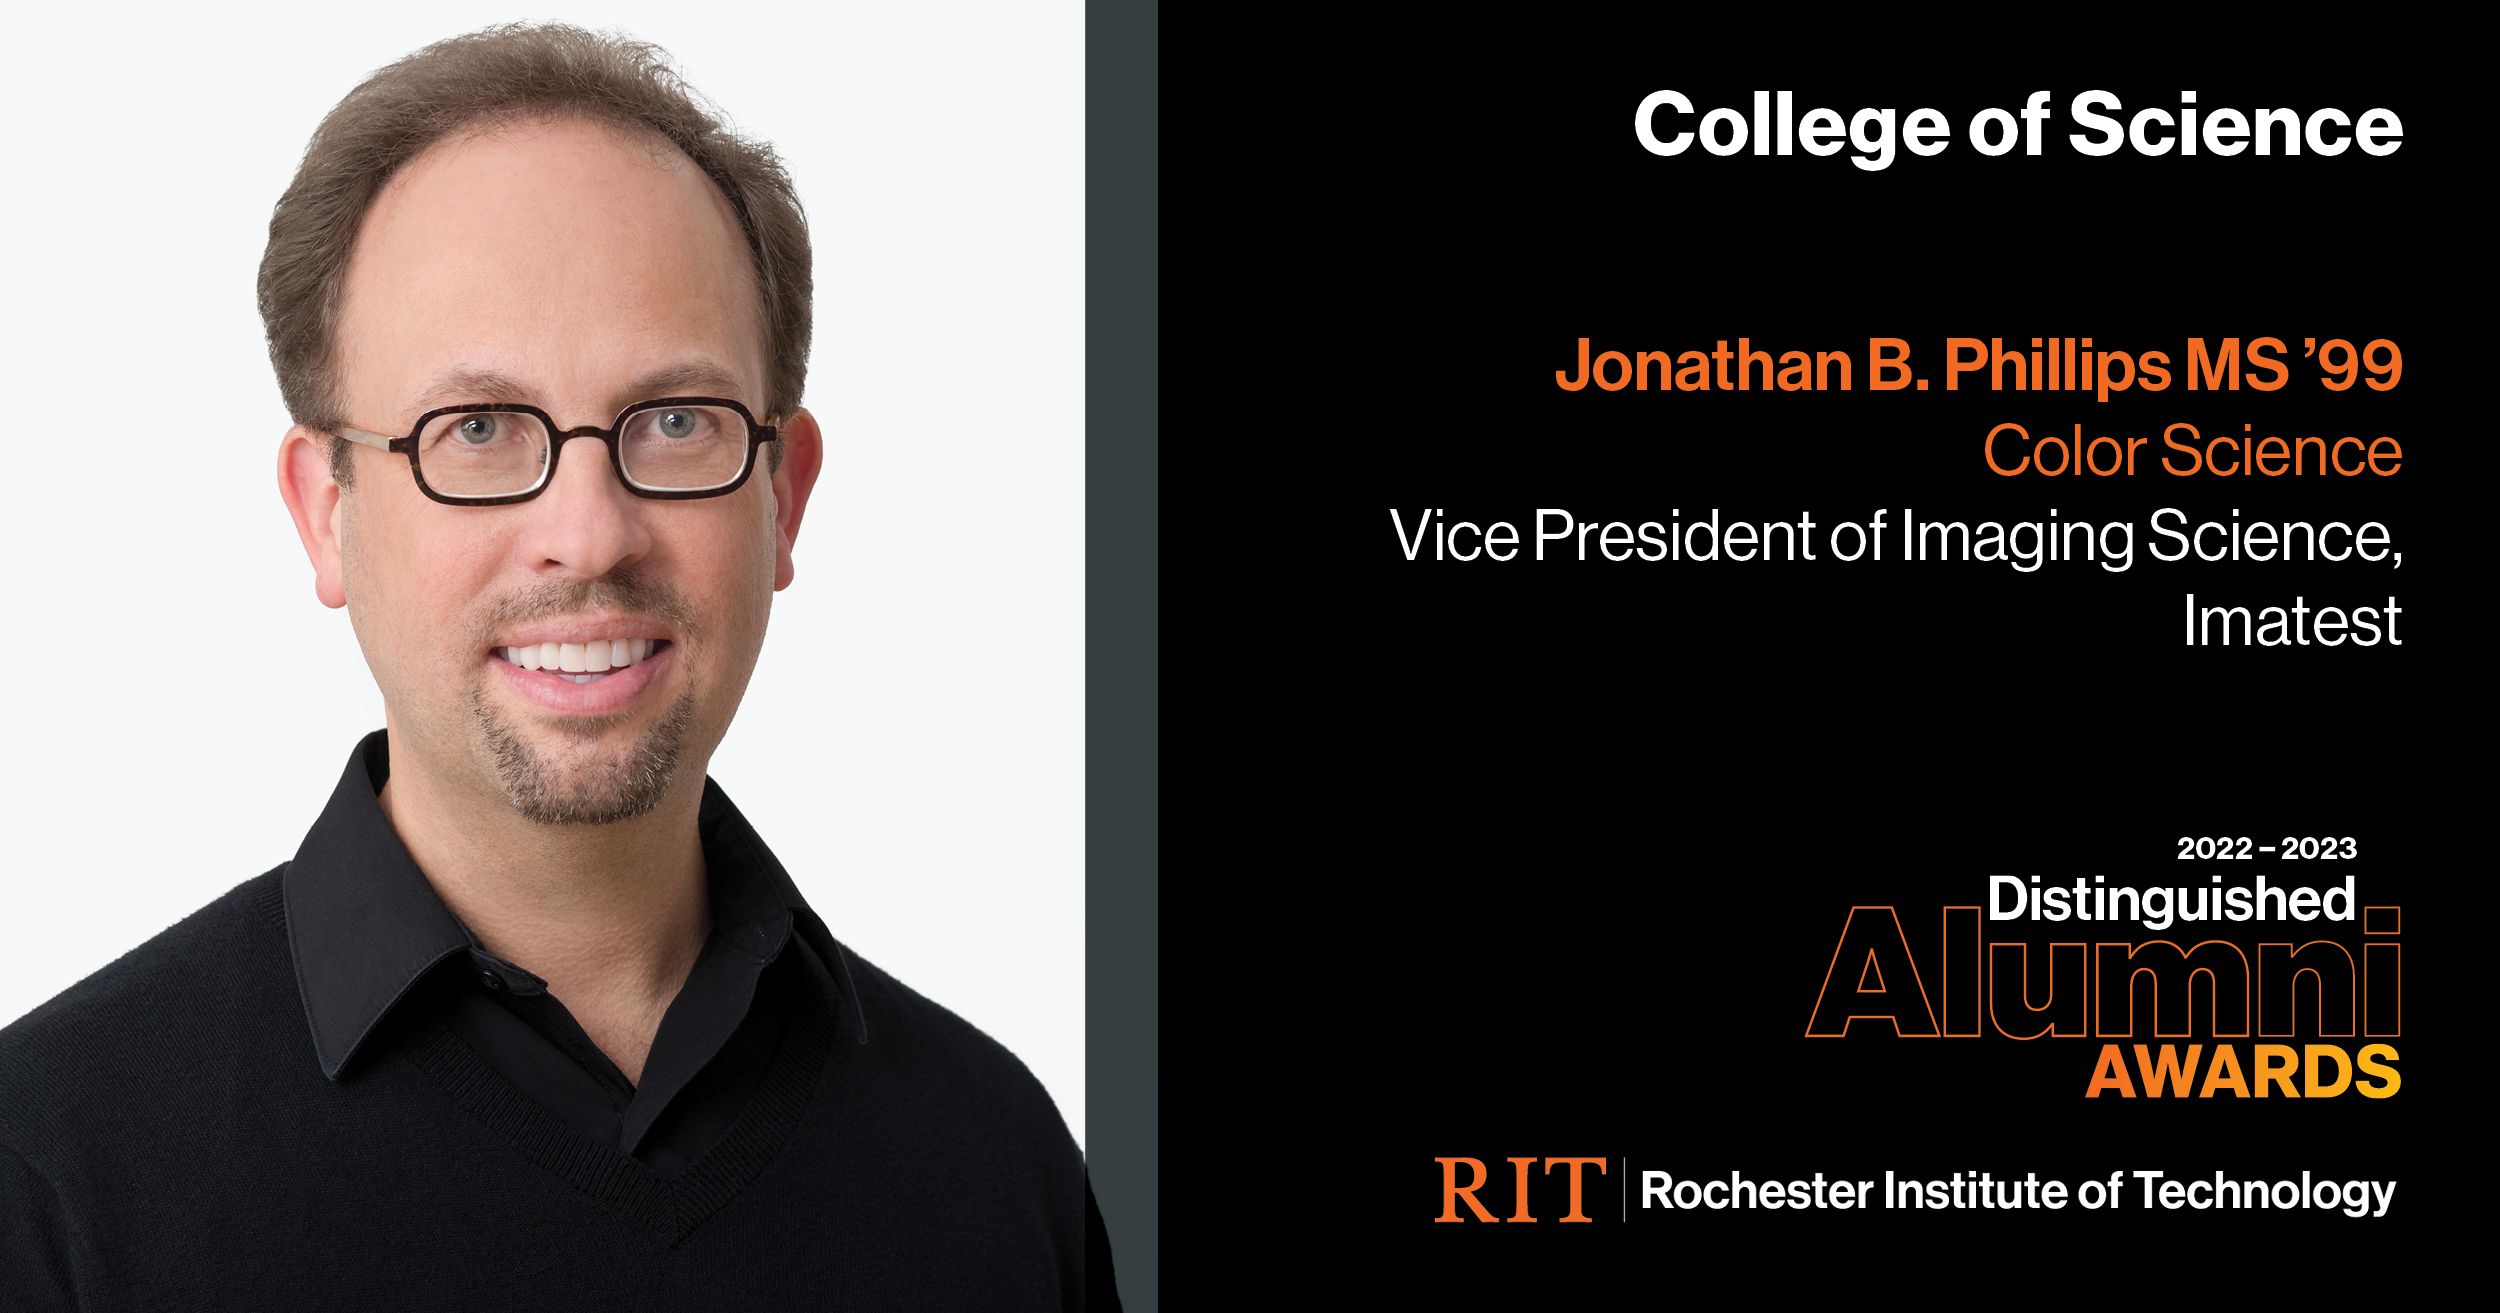 Image on Left: Head shot Jonathan B. Philips MS '99 Text on RIght: College of Science  Jonathan B. Philips MS '99 Color Science, Vice President of Imagine Science, Imatest 2022-2023 Alumni Awards RIT | Rochester Institute of Technology